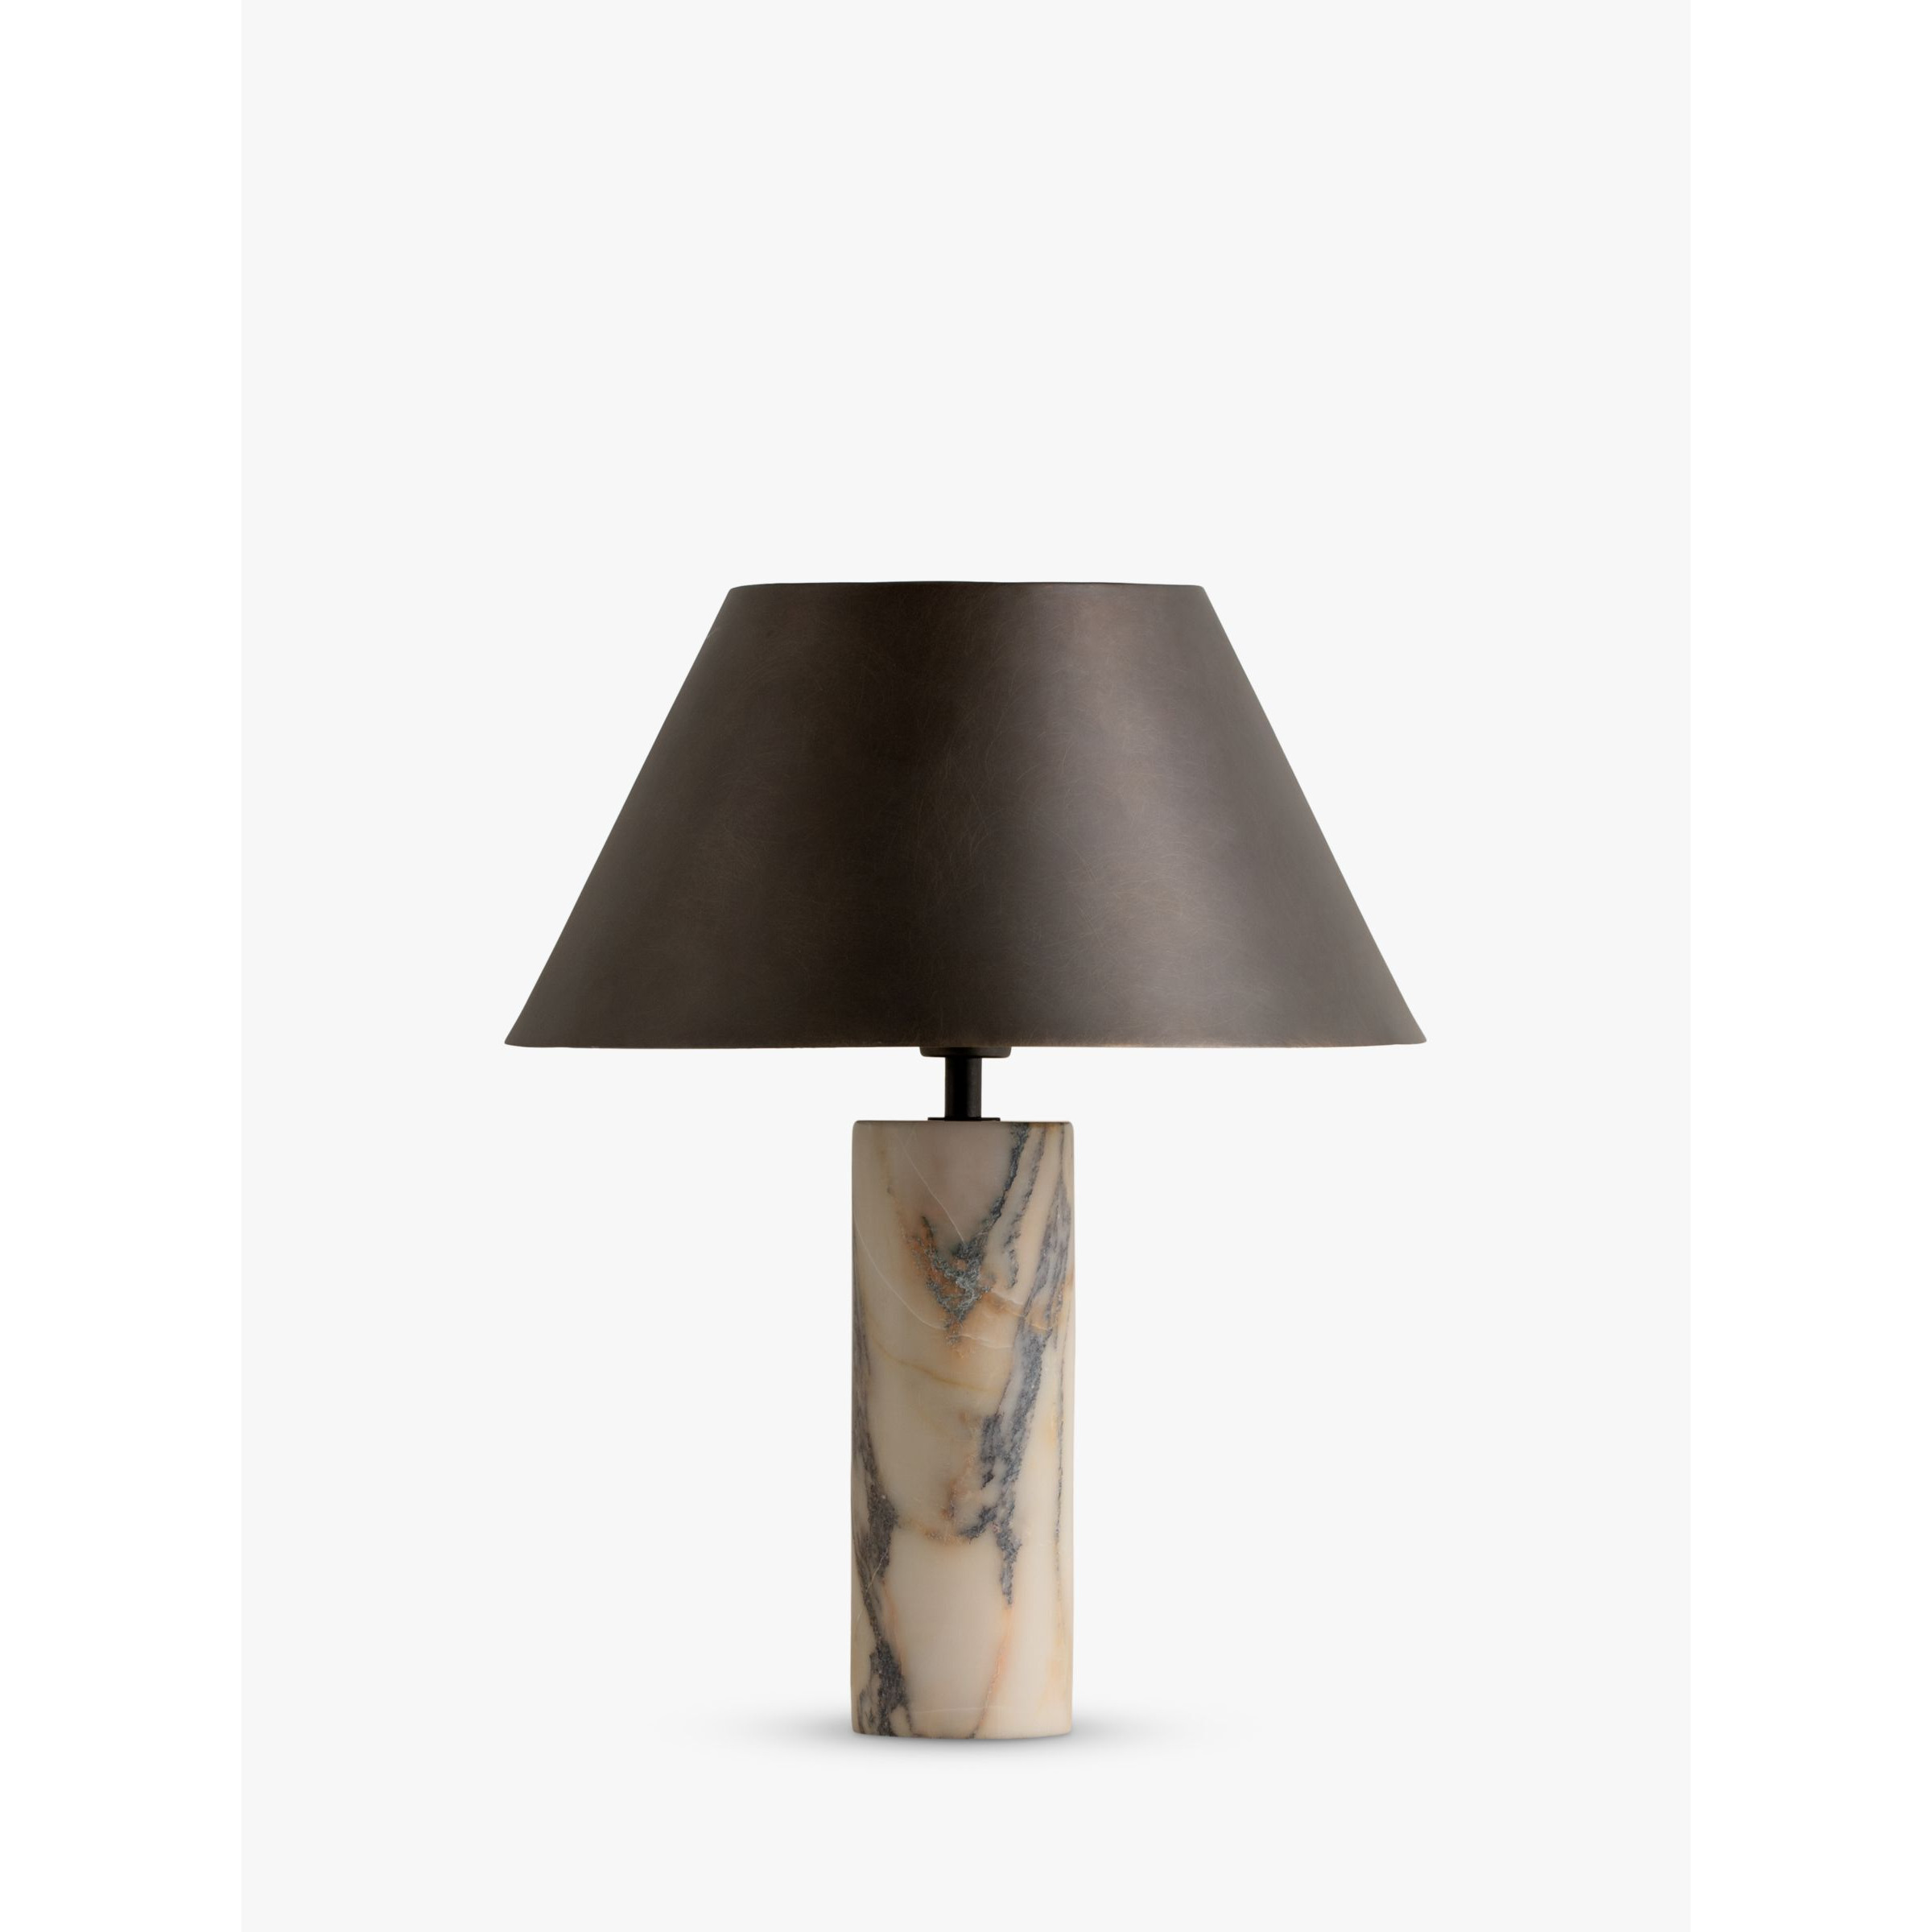 Lights & Lamps Cline Marble Table Lamp, Bronze - image 1